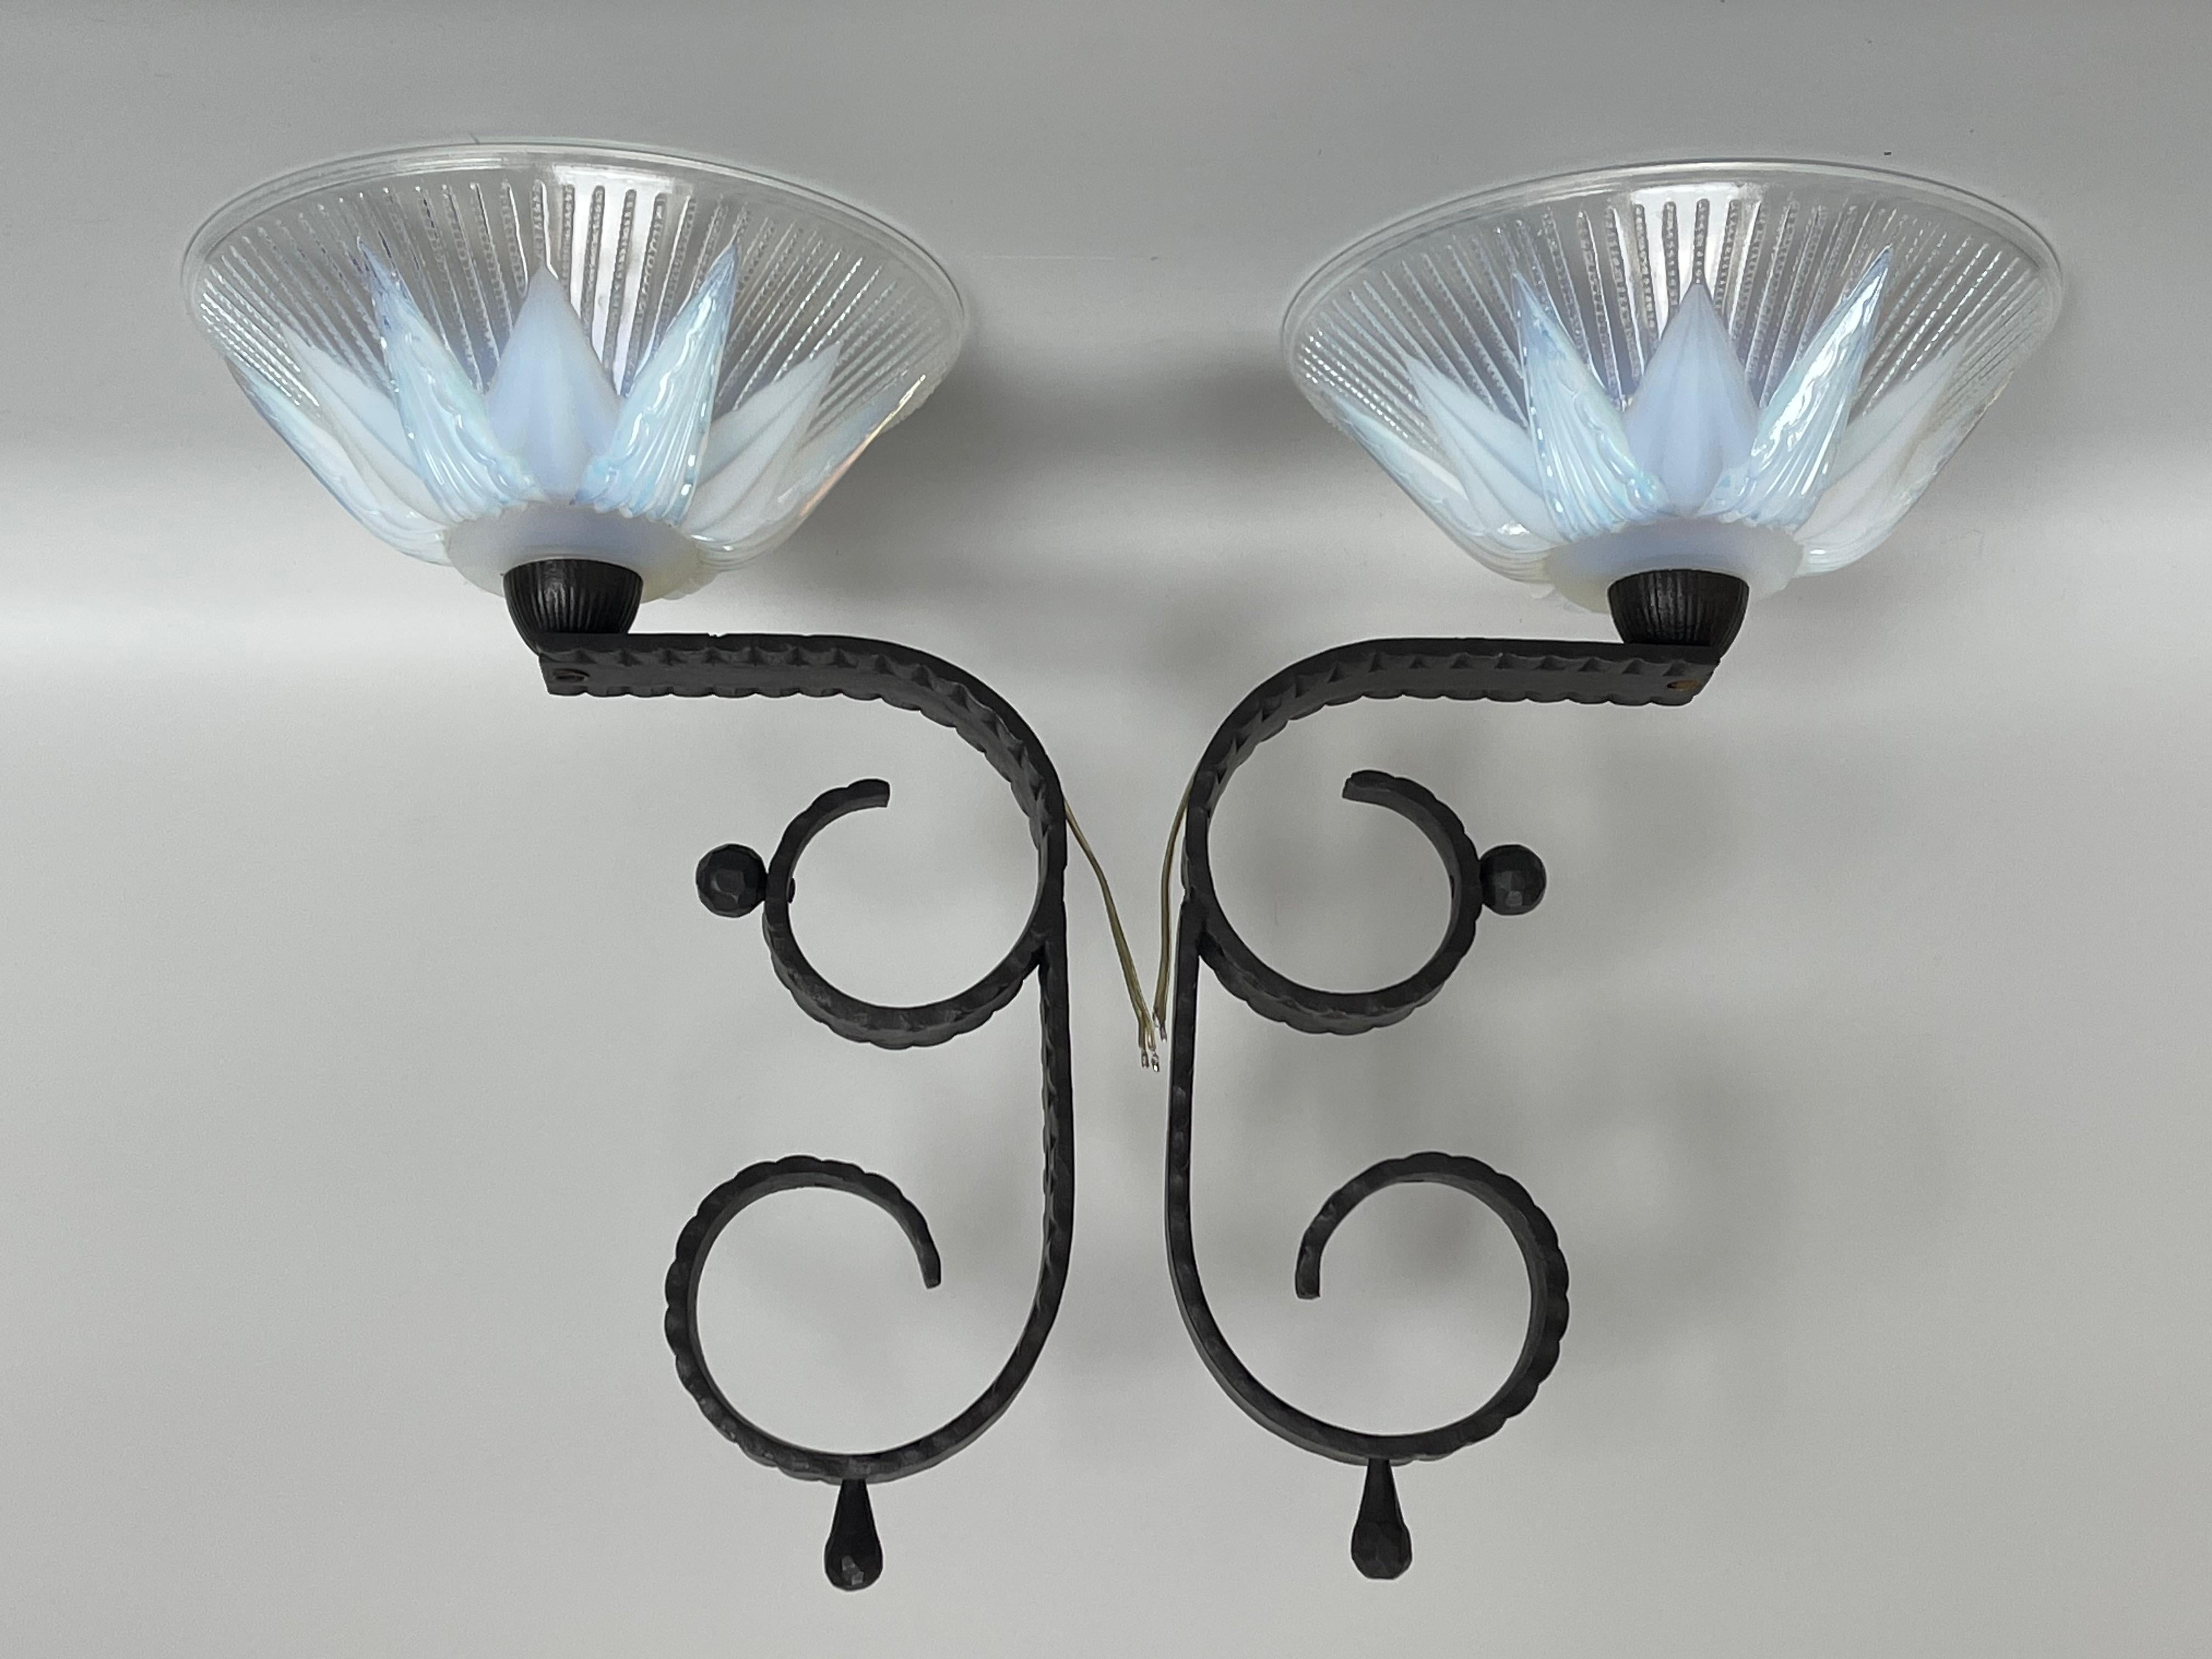 Hammered Pair of Art Deco Opalescent Wall Lights by Ezan